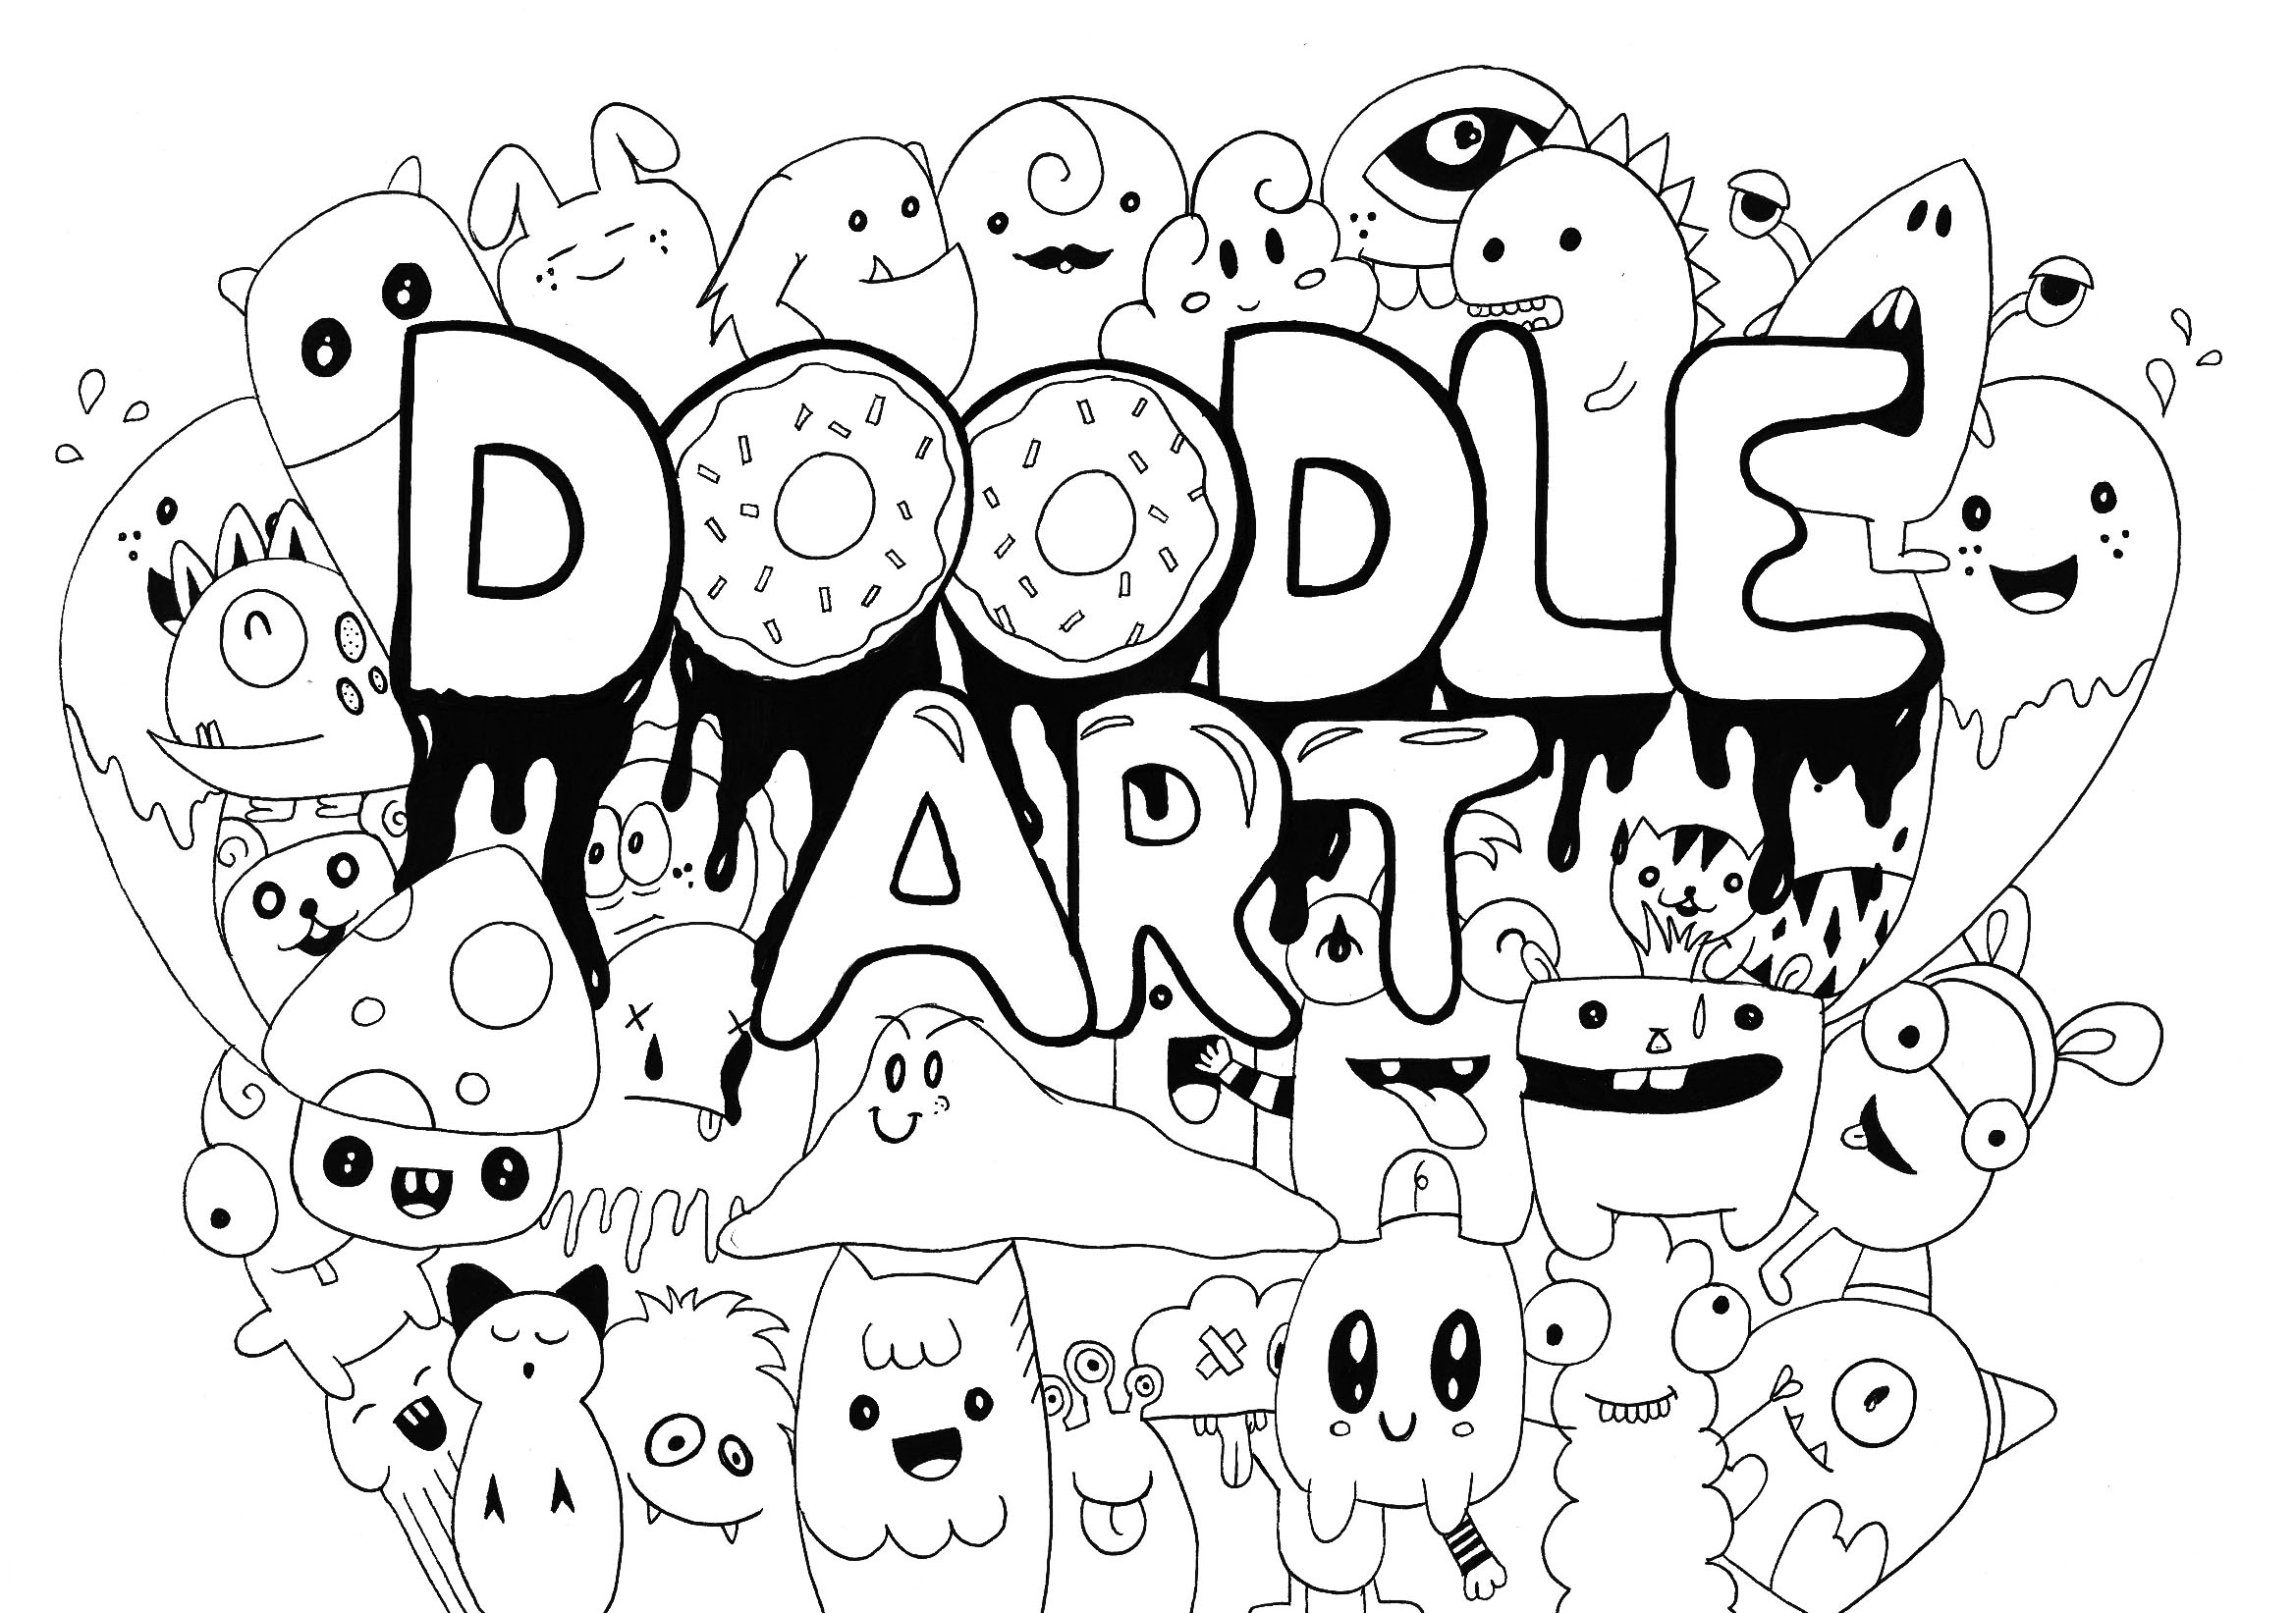 Download Coloring Pages Vexx Doodles Coloring Pages